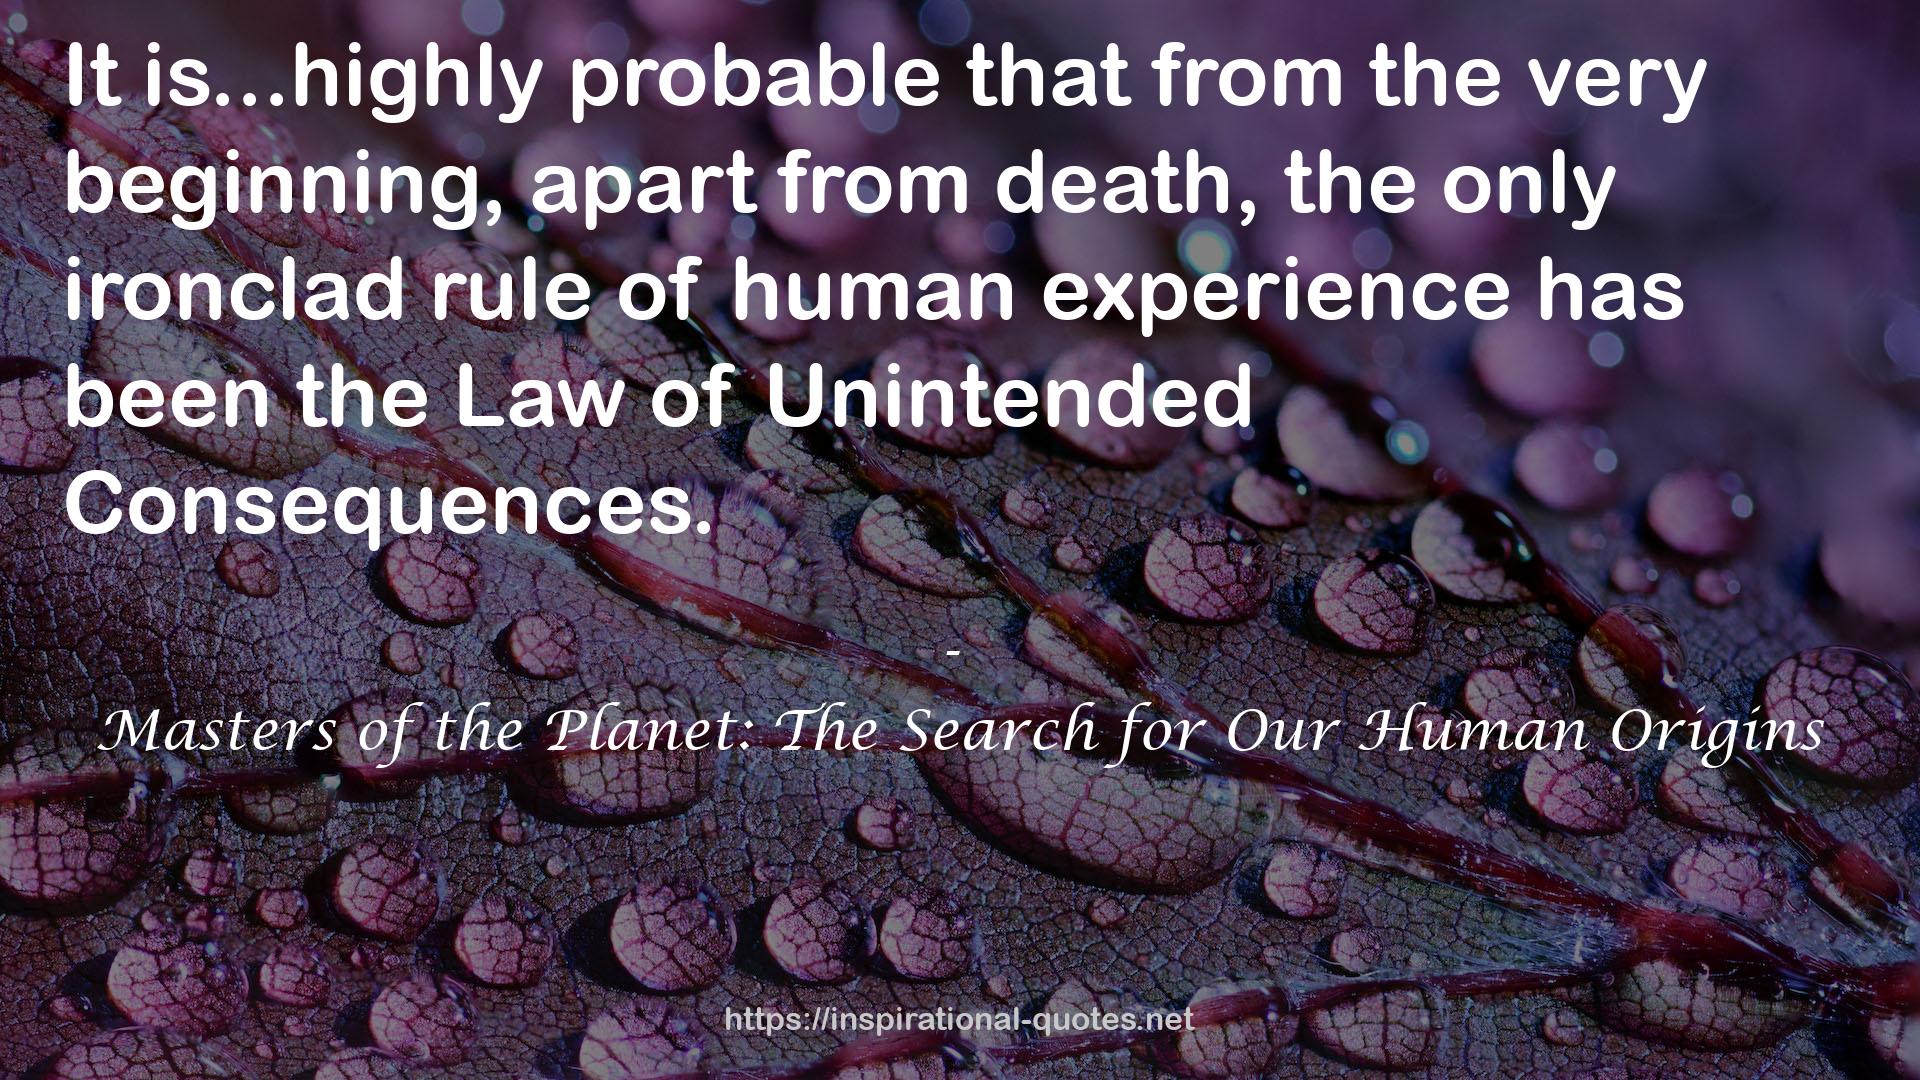 Masters of the Planet: The Search for Our Human Origins QUOTES